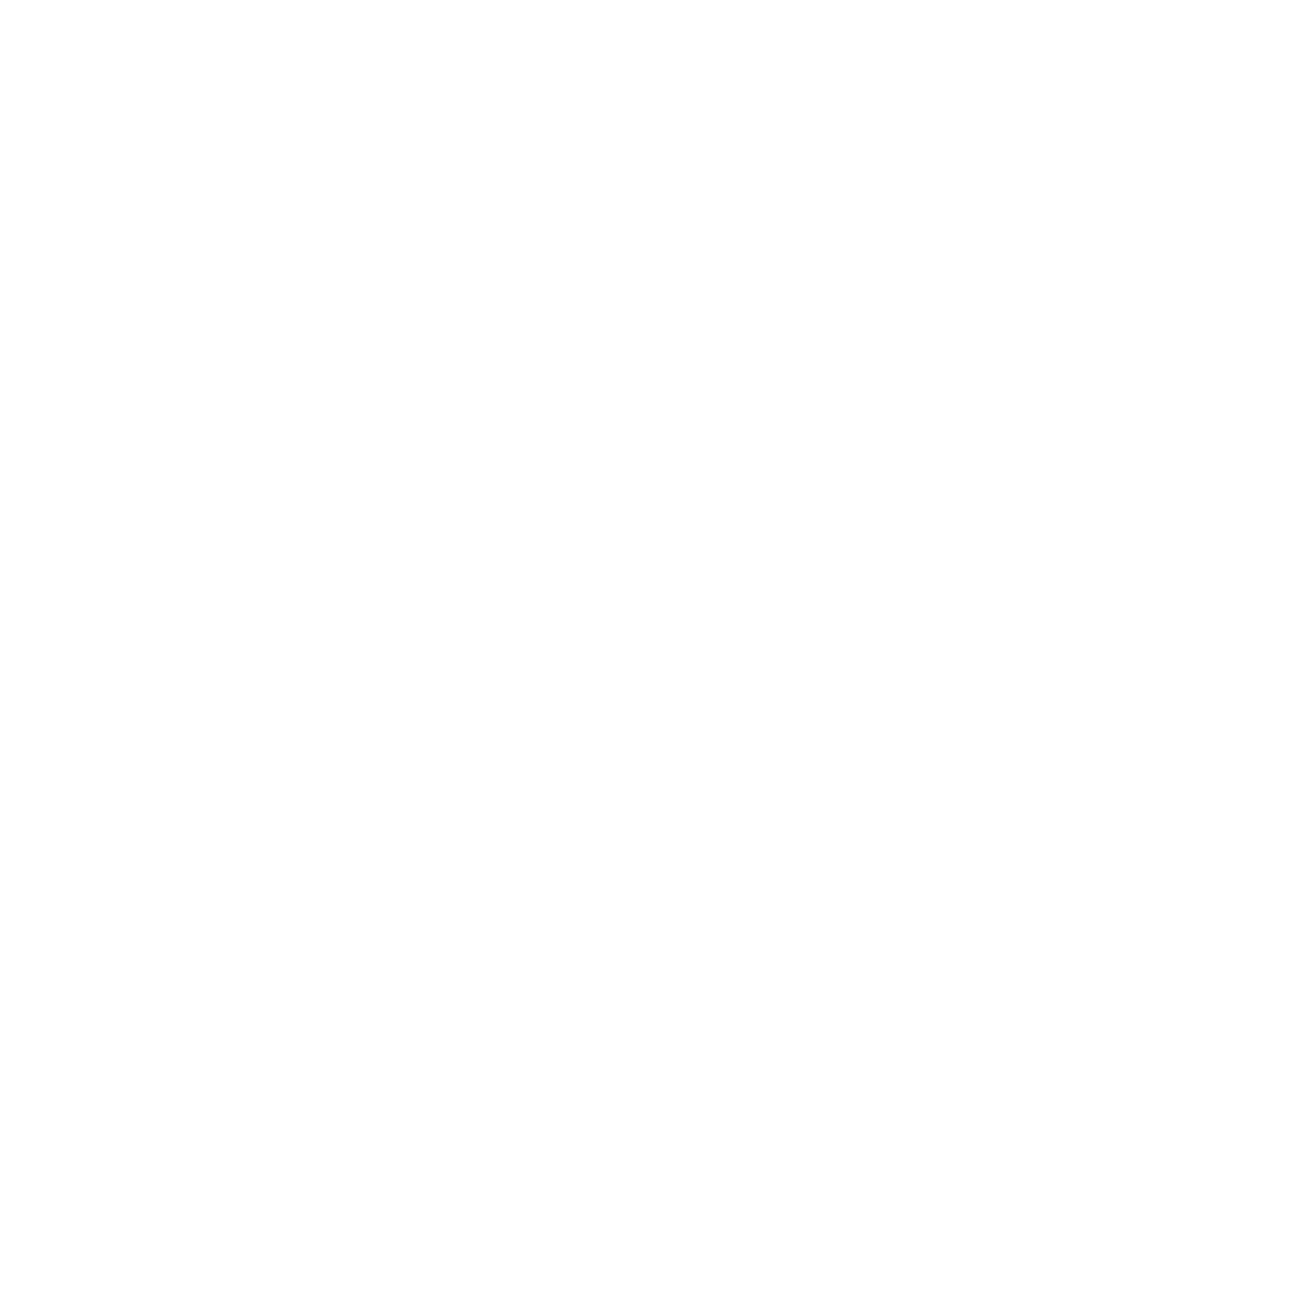 Doc NYC official selection laurel